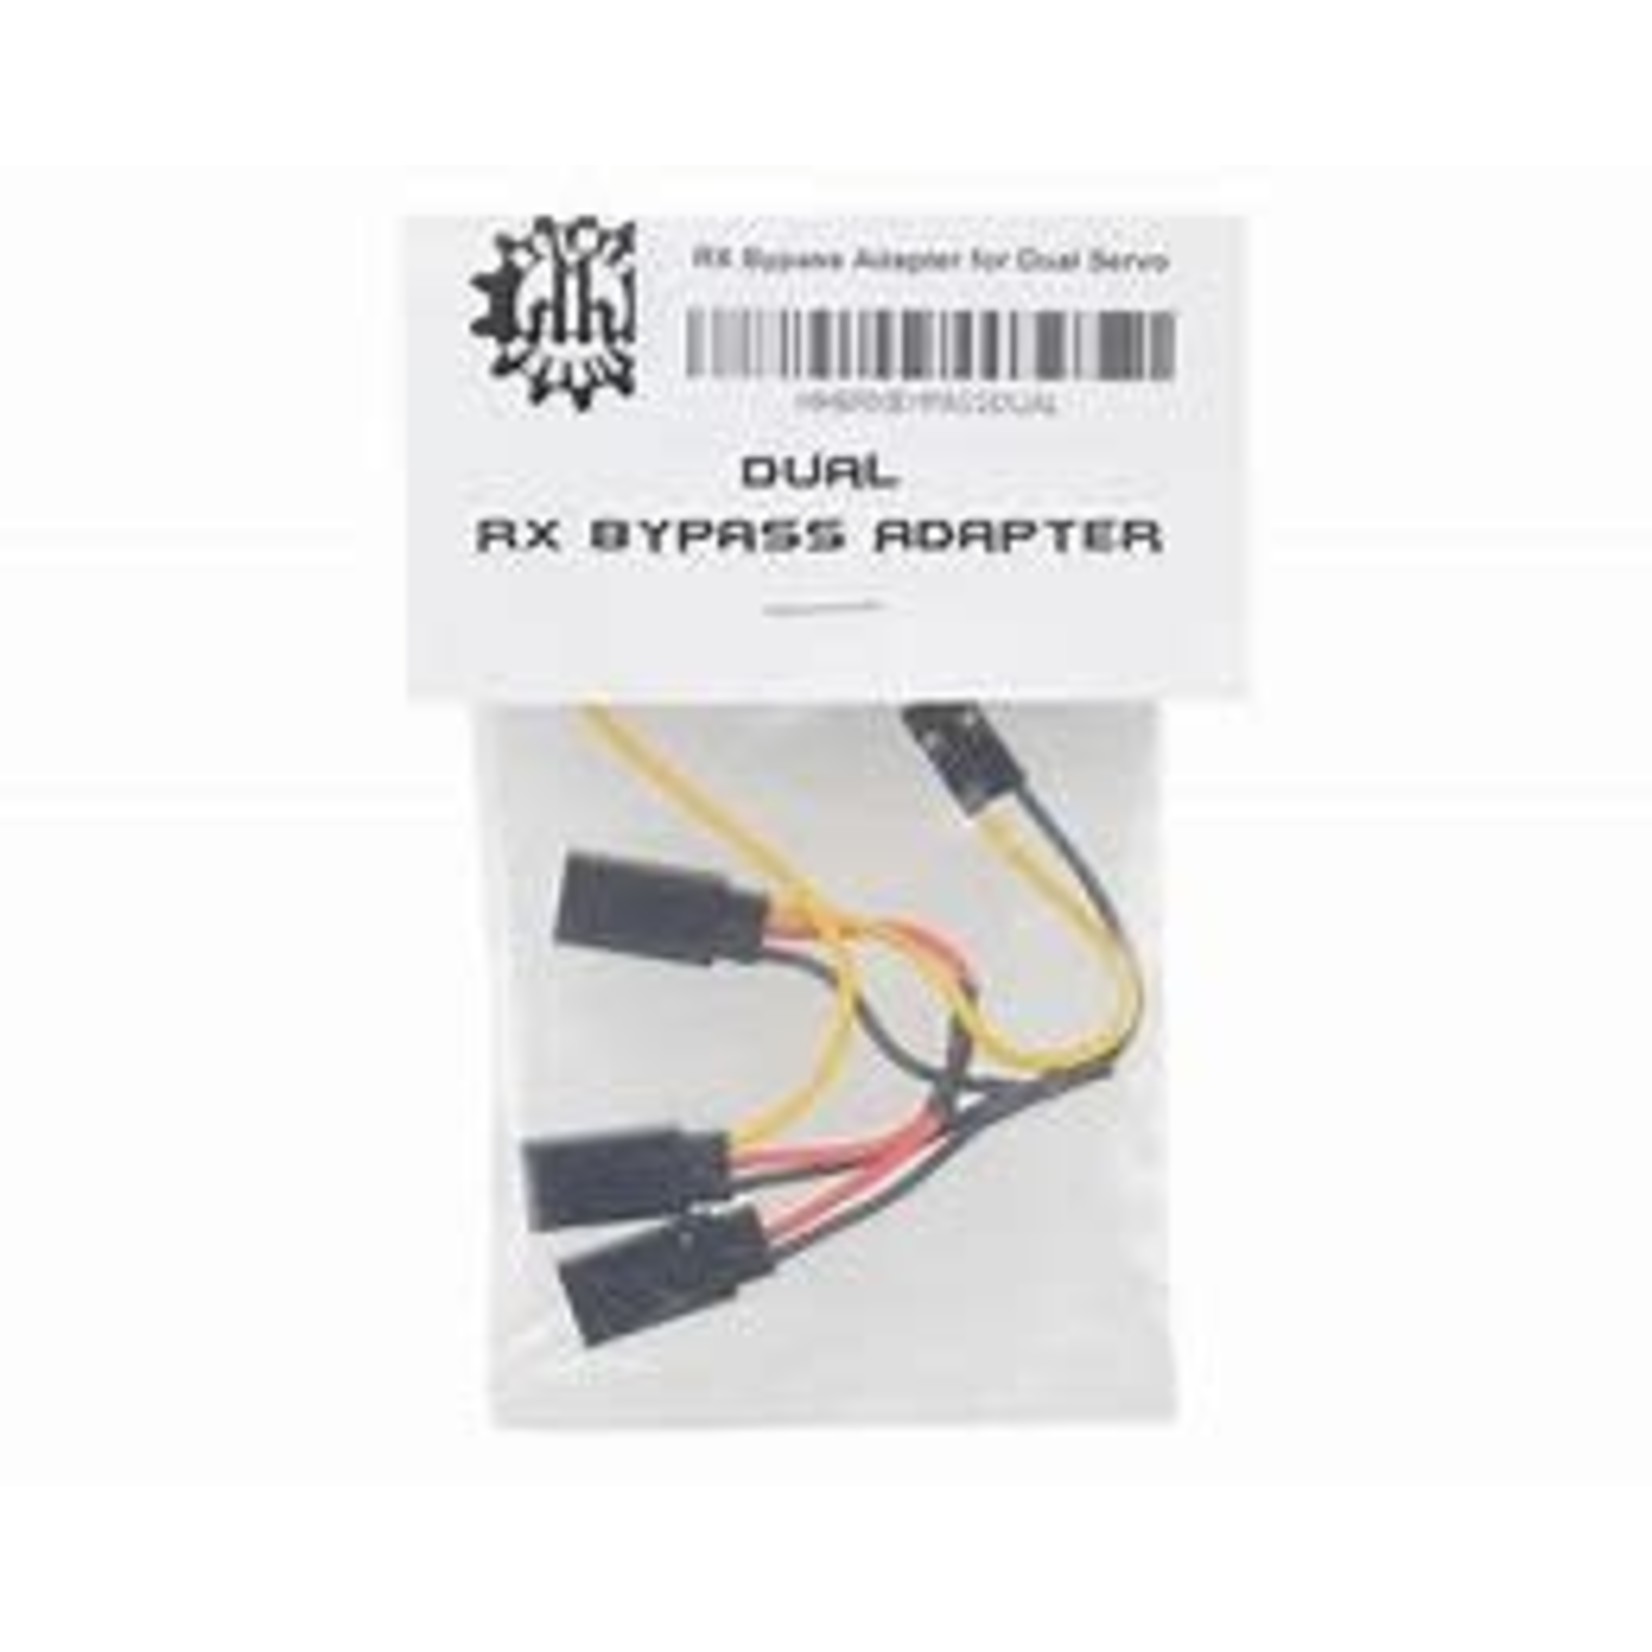 Holmes Hobbies DUAL RC bypass adapter for BEC